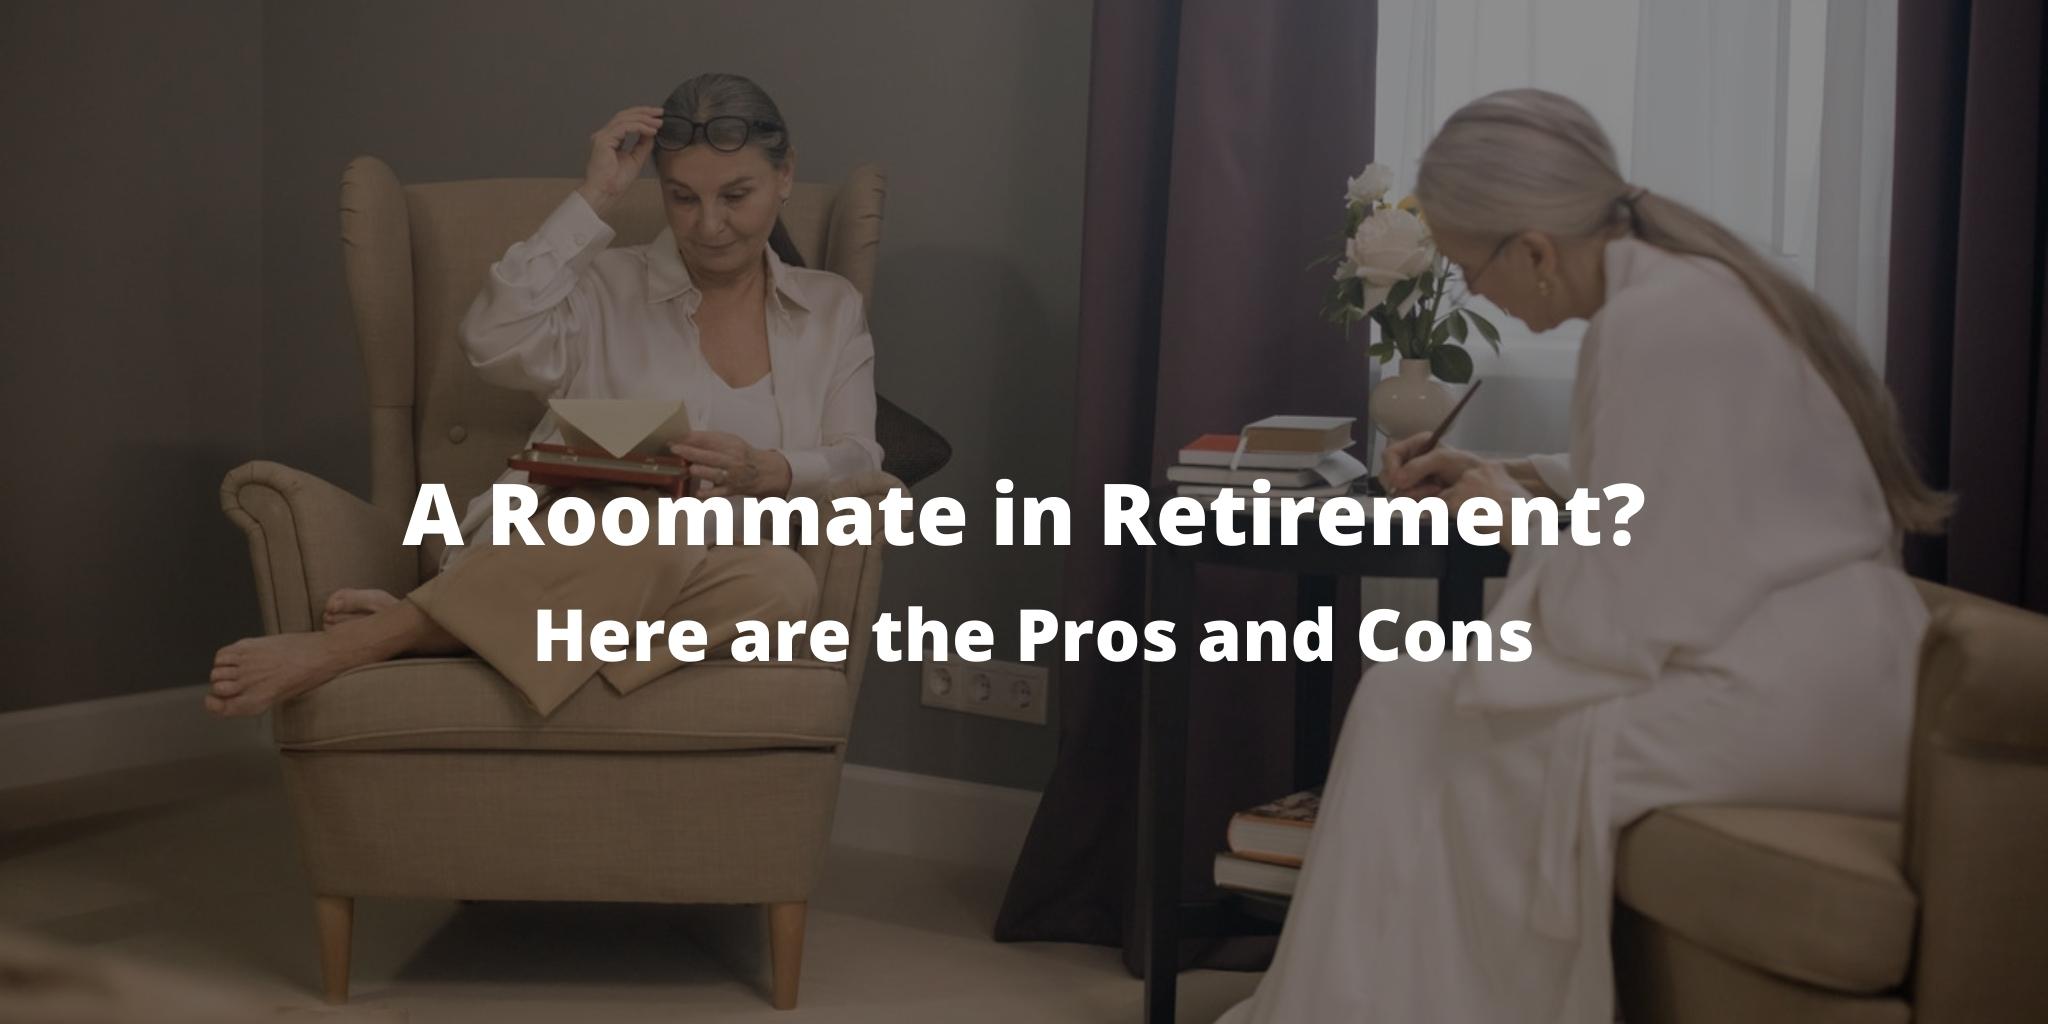 A Roommate in Retirement? Here are the Pros and Cons